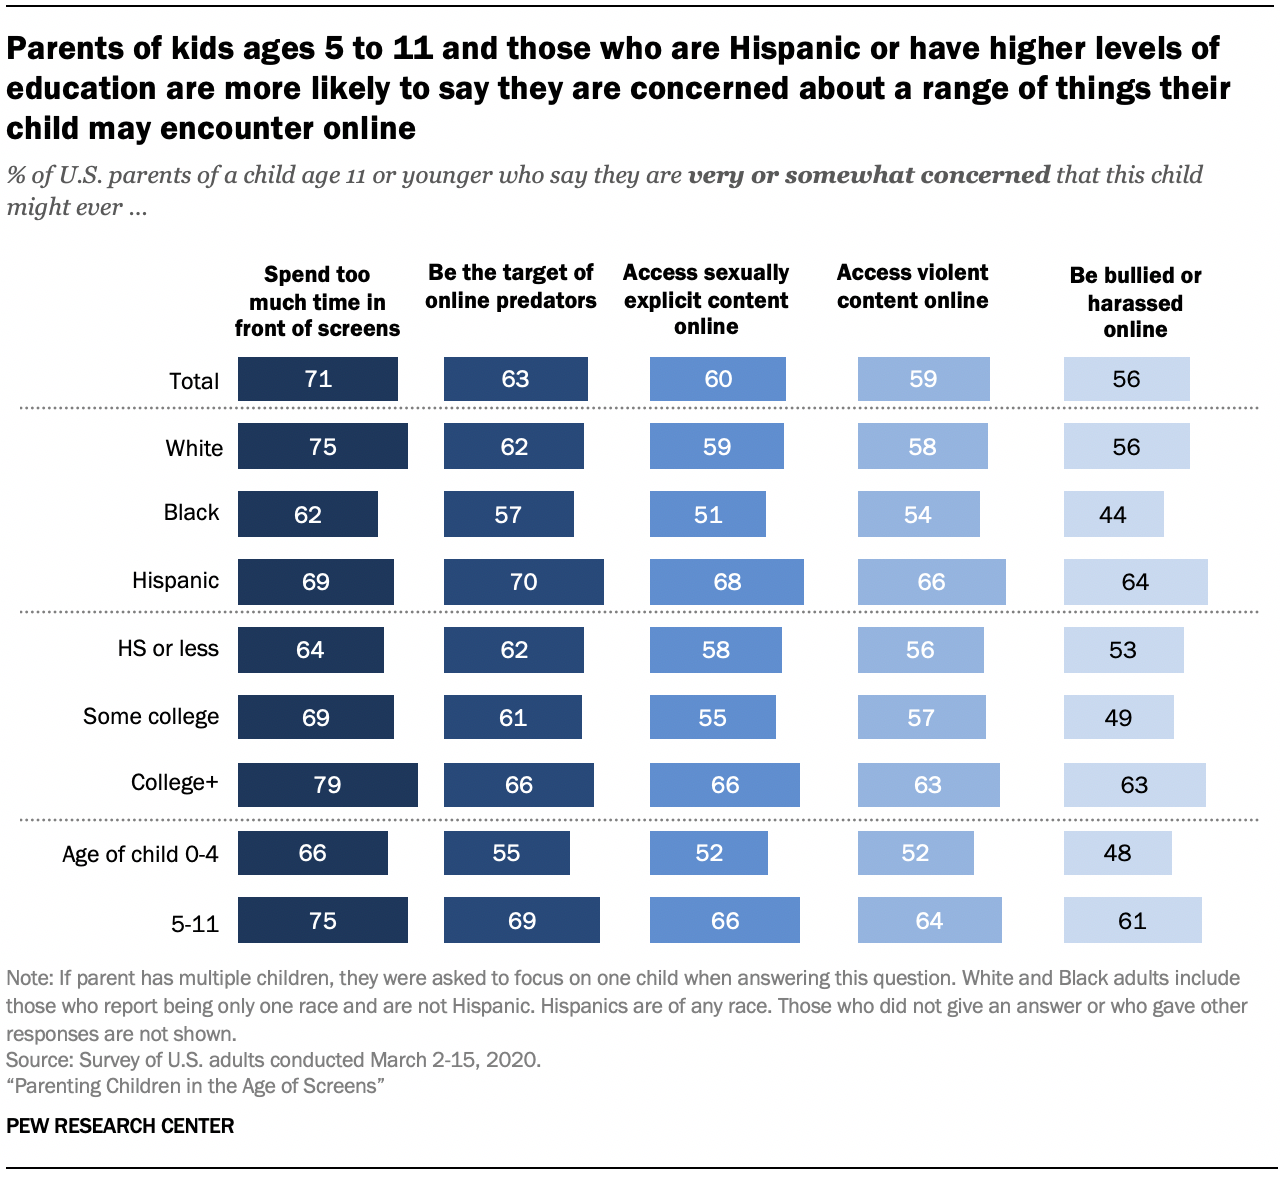 Chart shows parents of kids ages 5 to 11 and those who are Hispanic or have higher levels of education are more likely to say they are concerned about a range of things their child may encounter online 